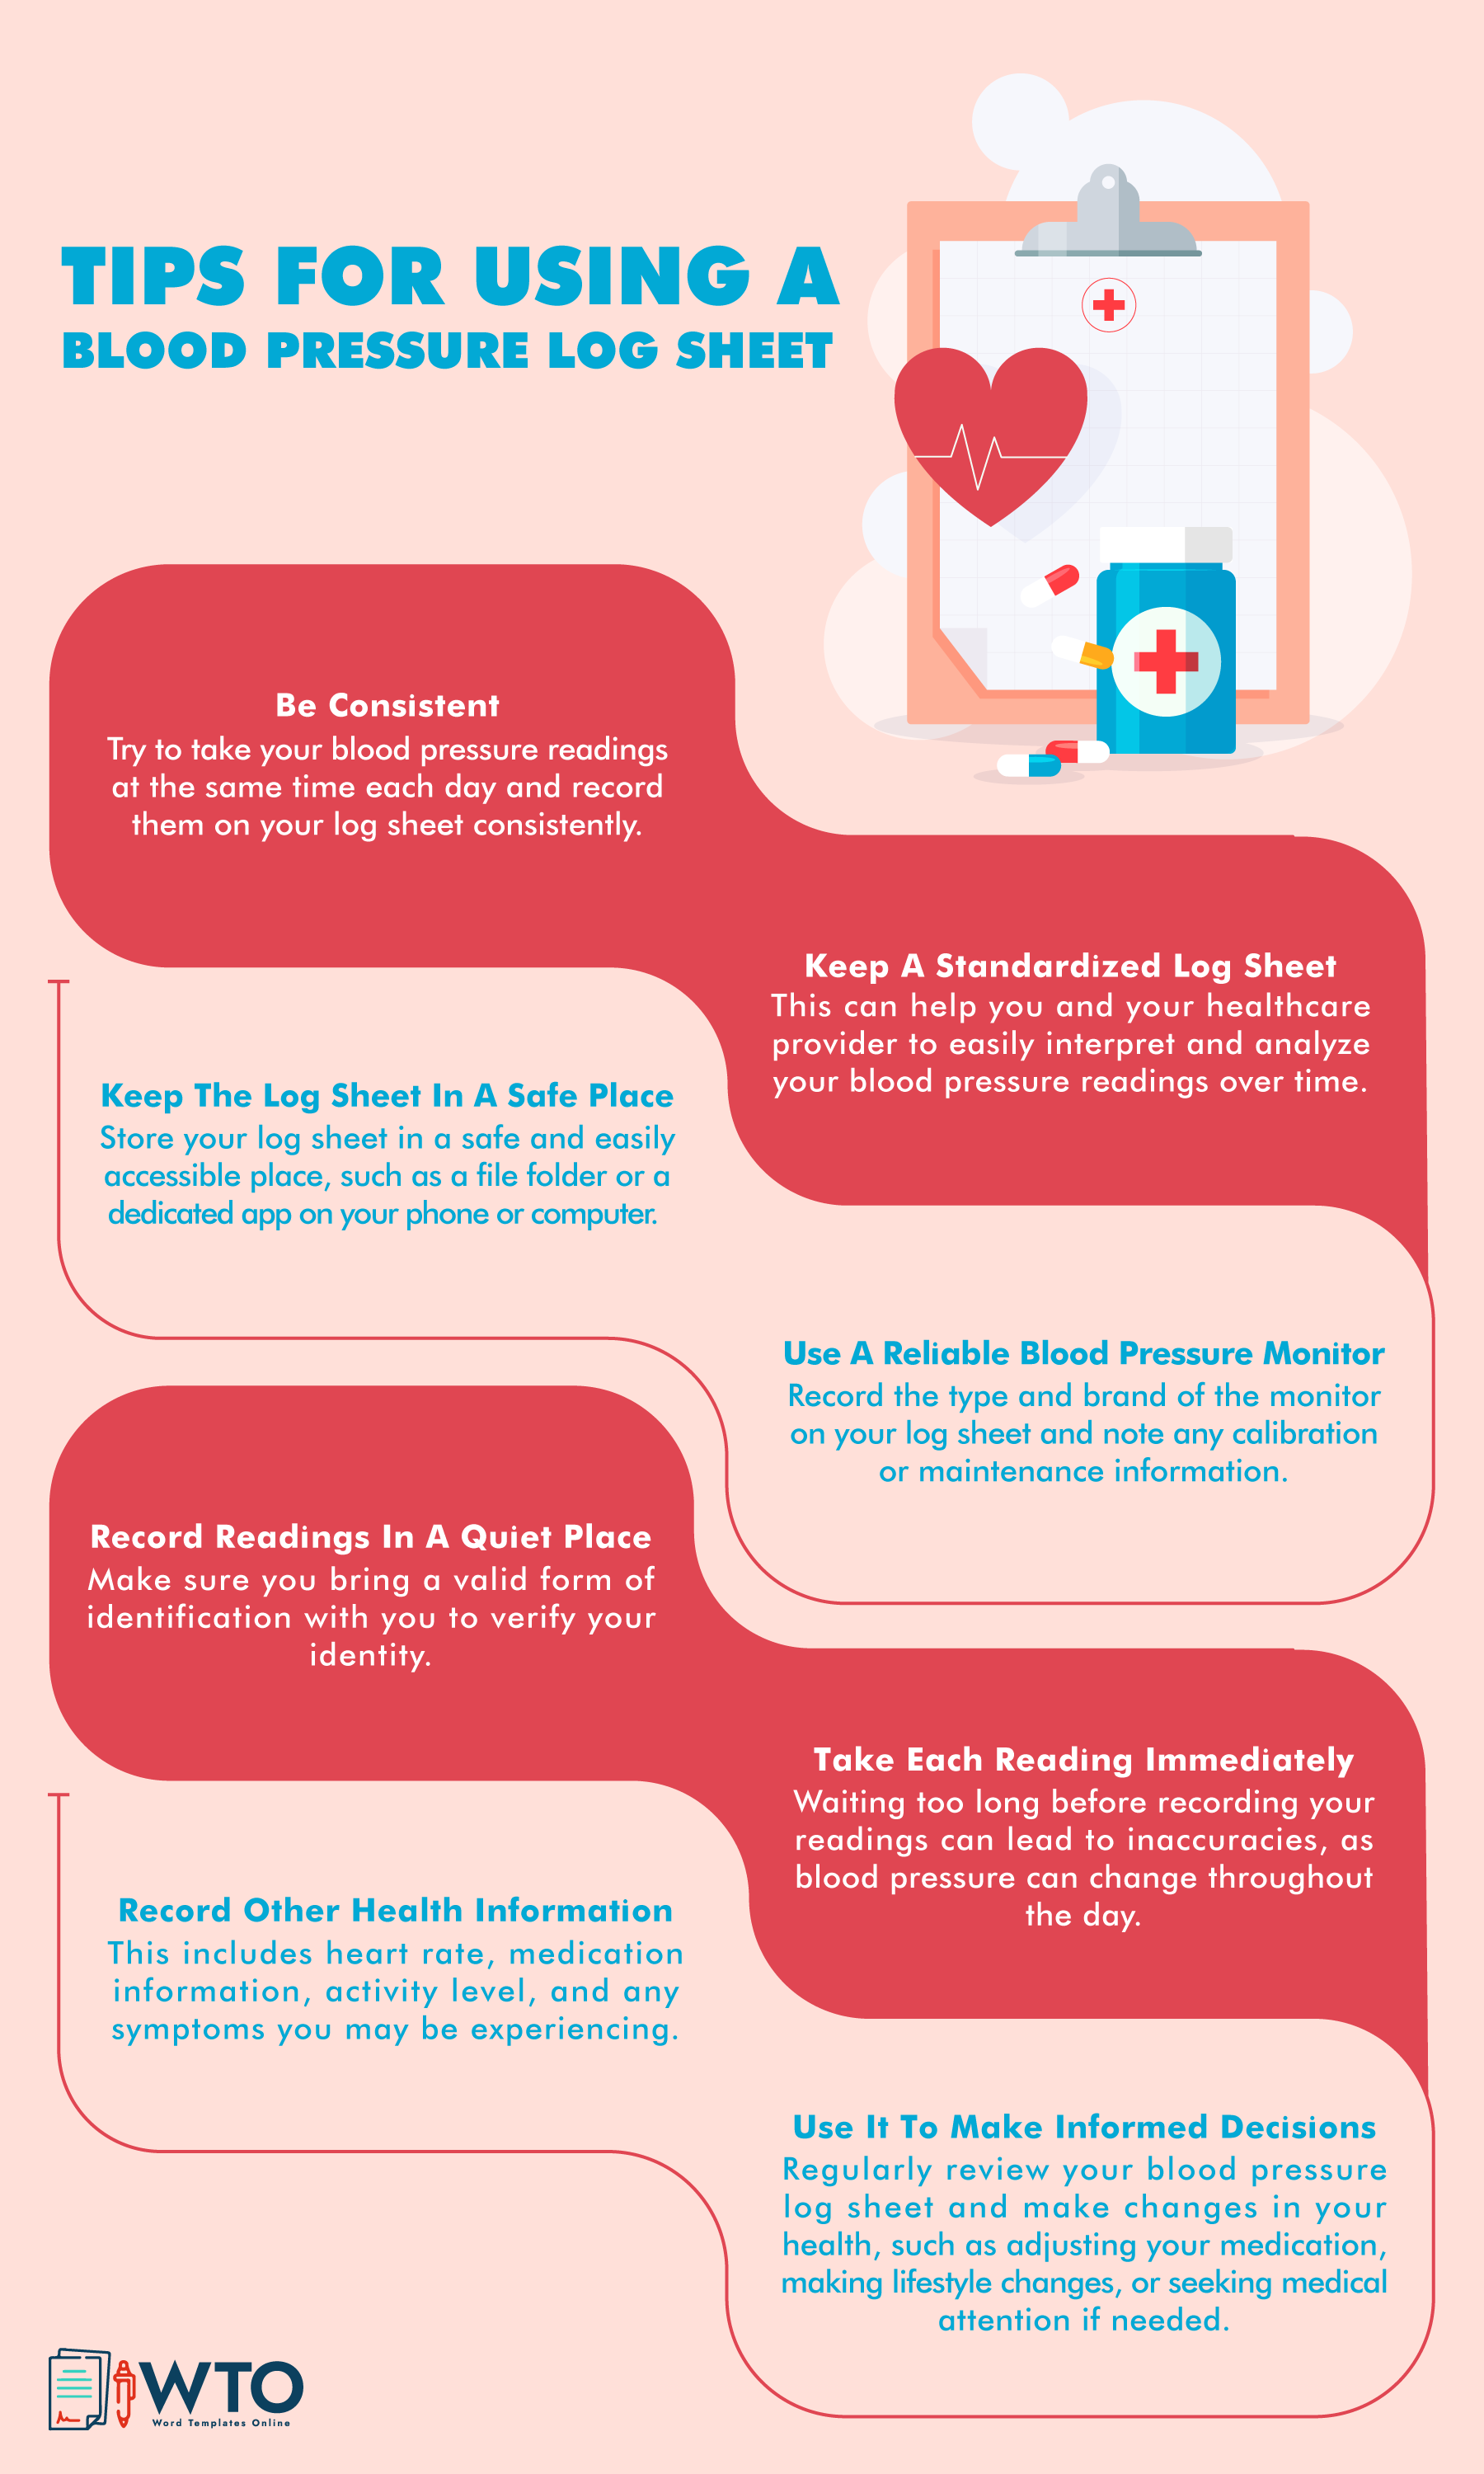 This infographic is about tips for using blood pressure log sheet.